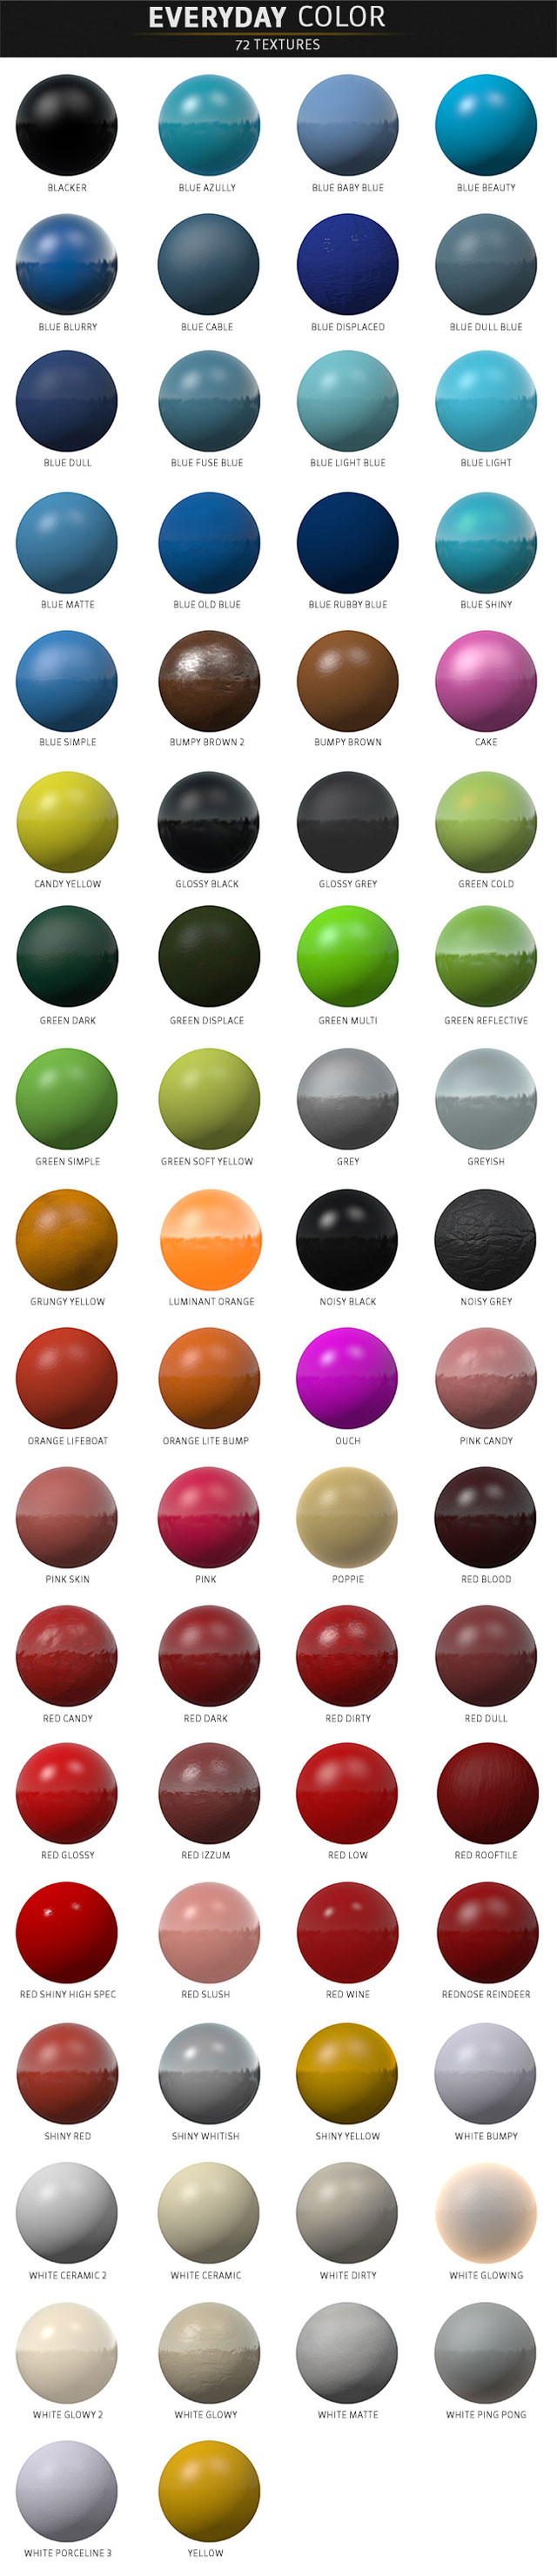 pixel lab materials pack everyday color